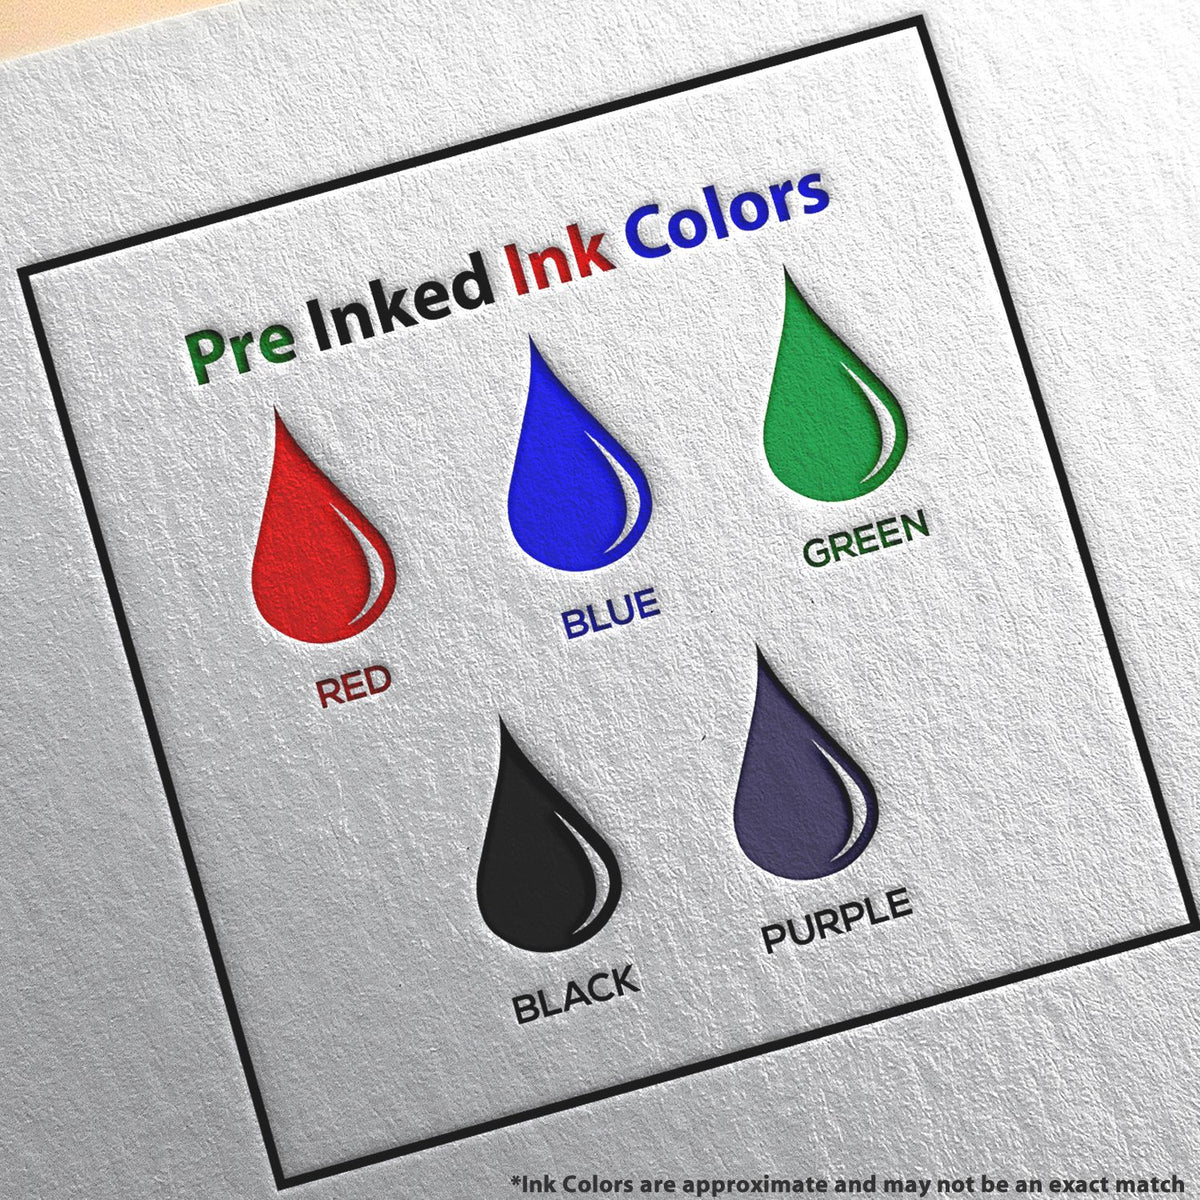 A picture showing the different ink colors or hues available for the Super Slim South Carolina Notary Public Stamp product.